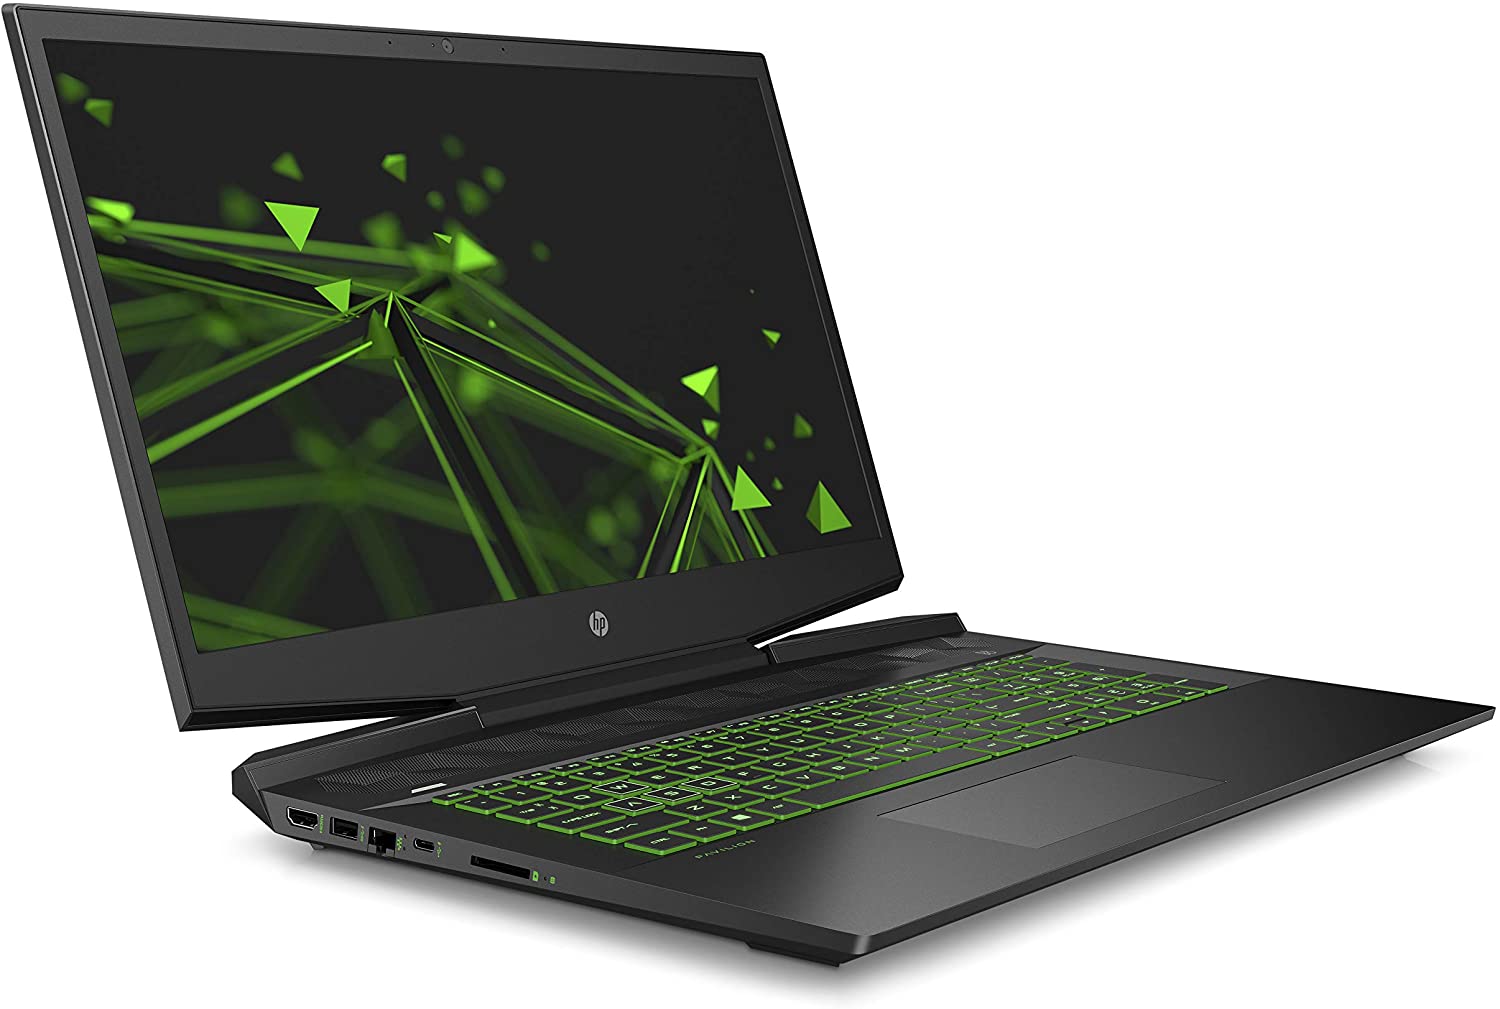 HP Pavilion Gaming 17 Gaming Laptop - N.D.S. Care for the Sailor in the